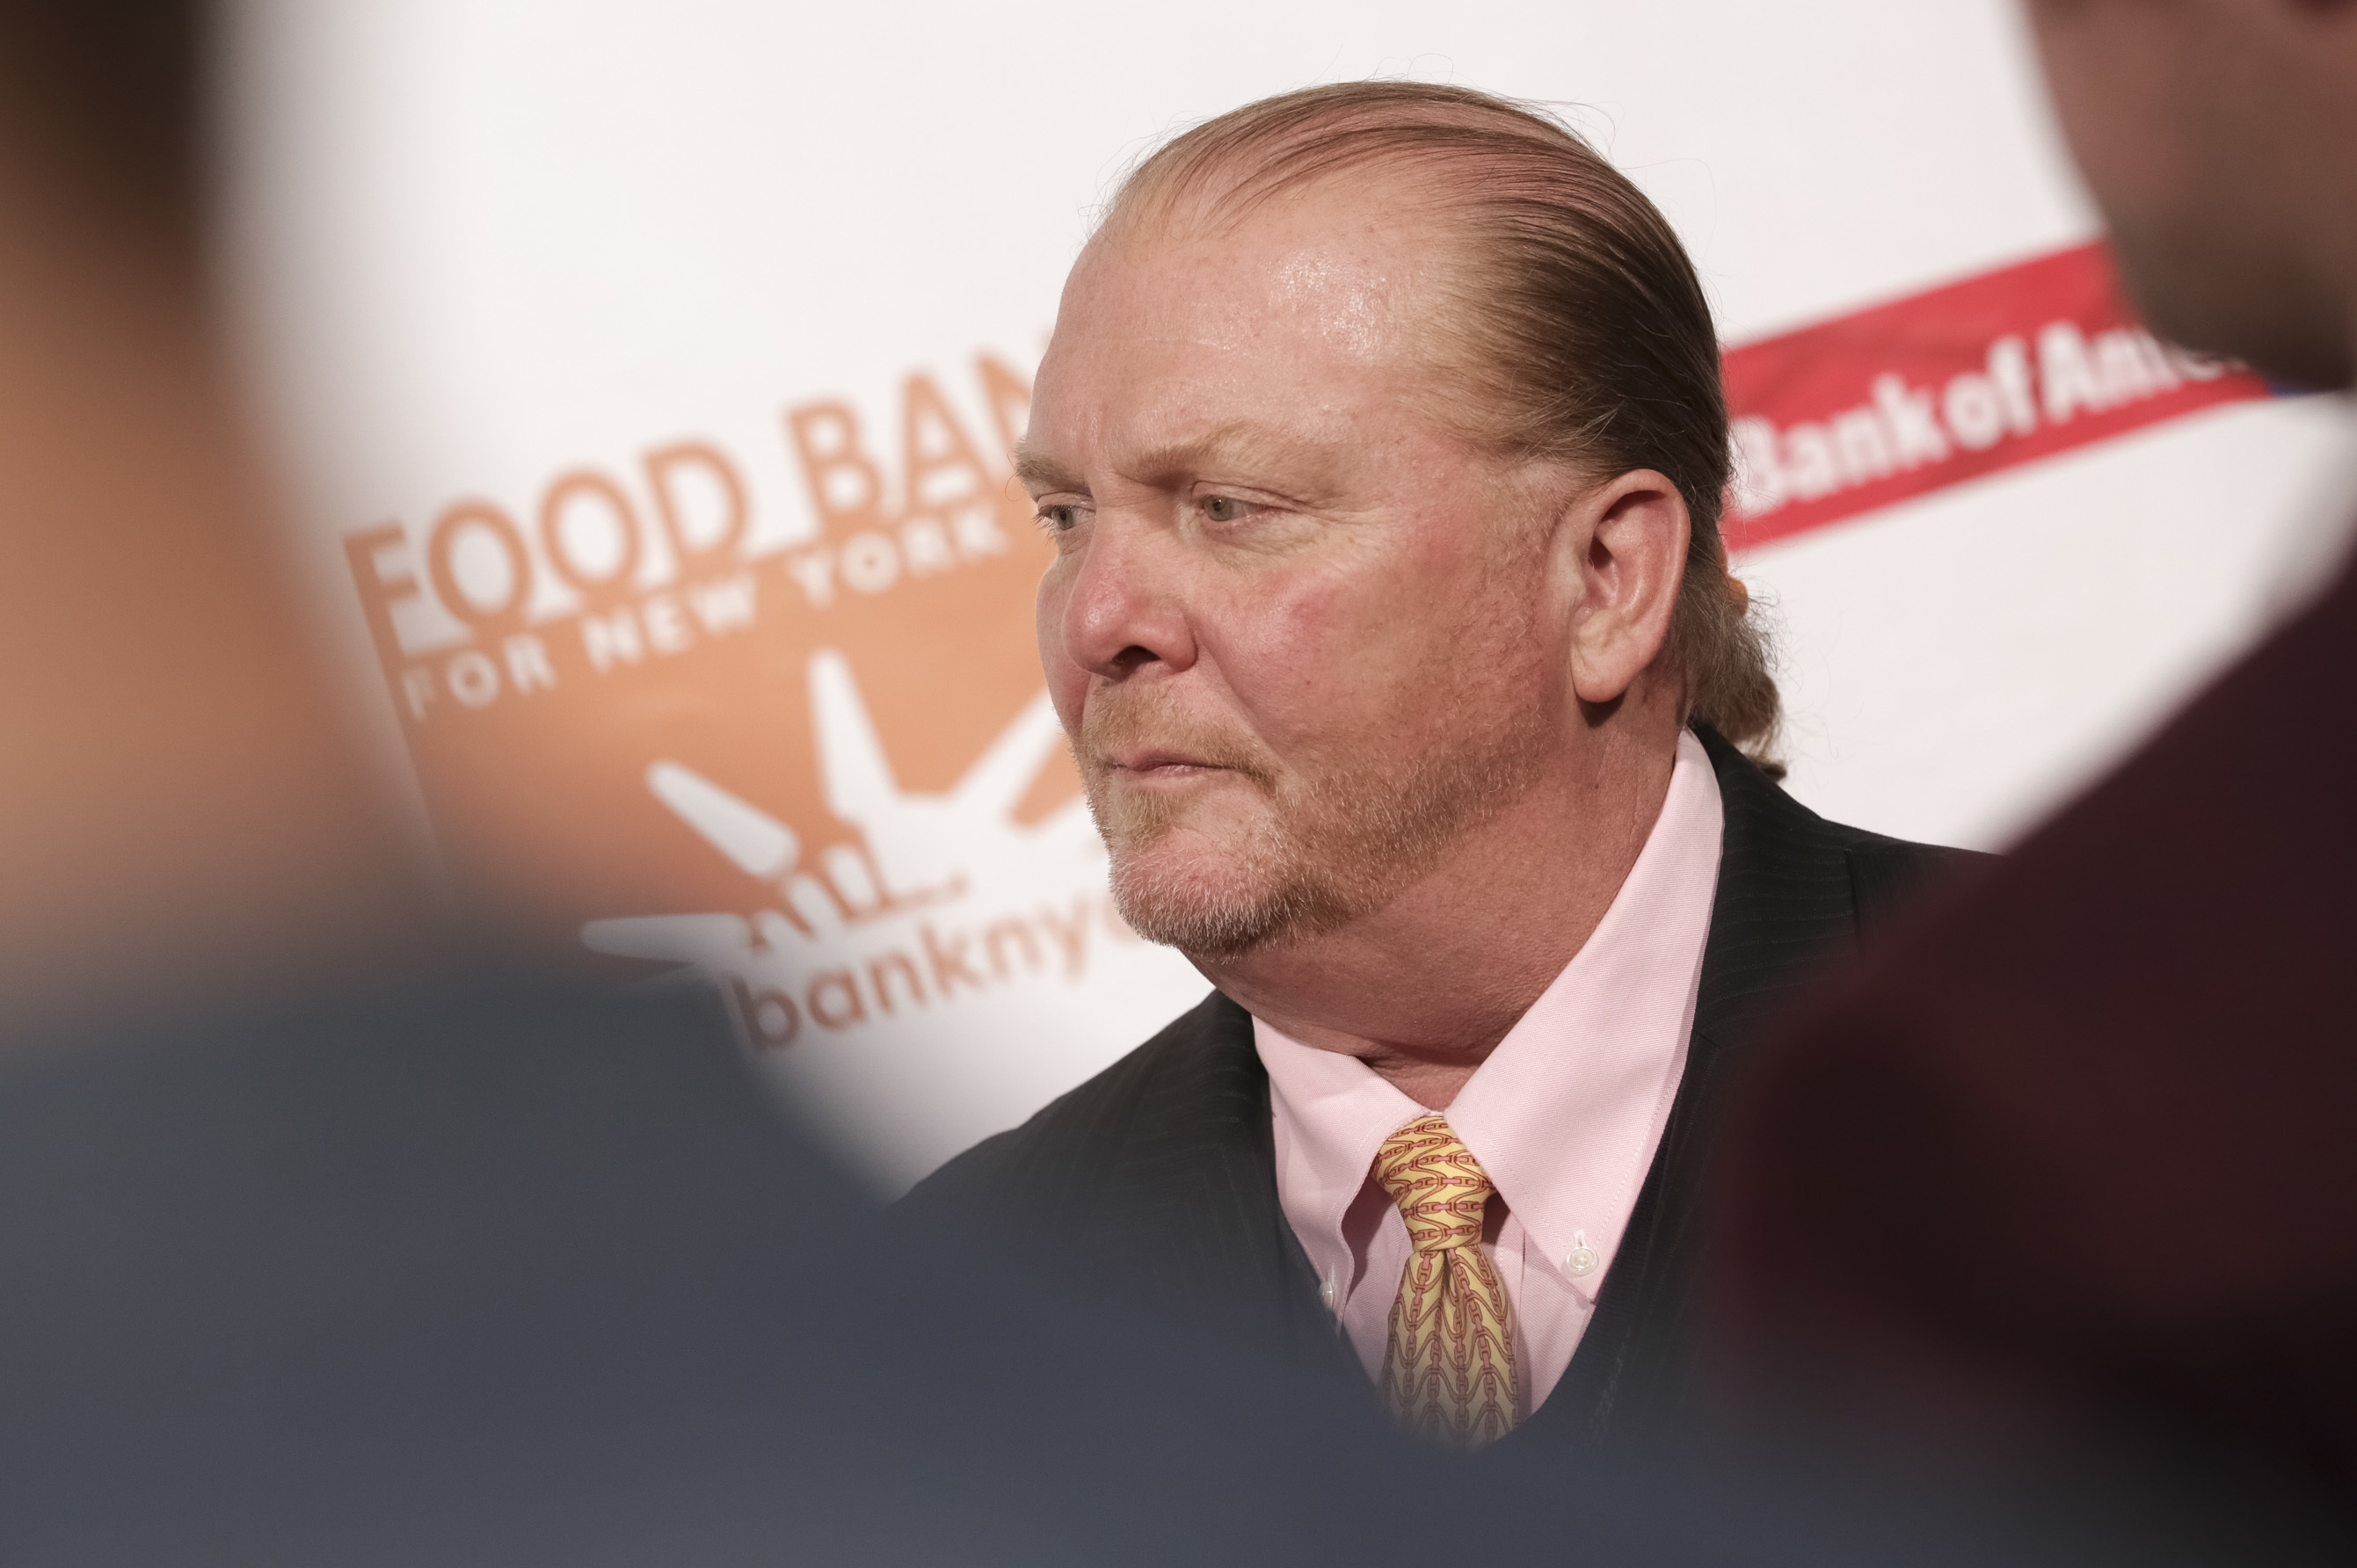 Mario Batali Is Stepping Away From a Multimillion-Dollar Empire. Here’s What We Know About His Money